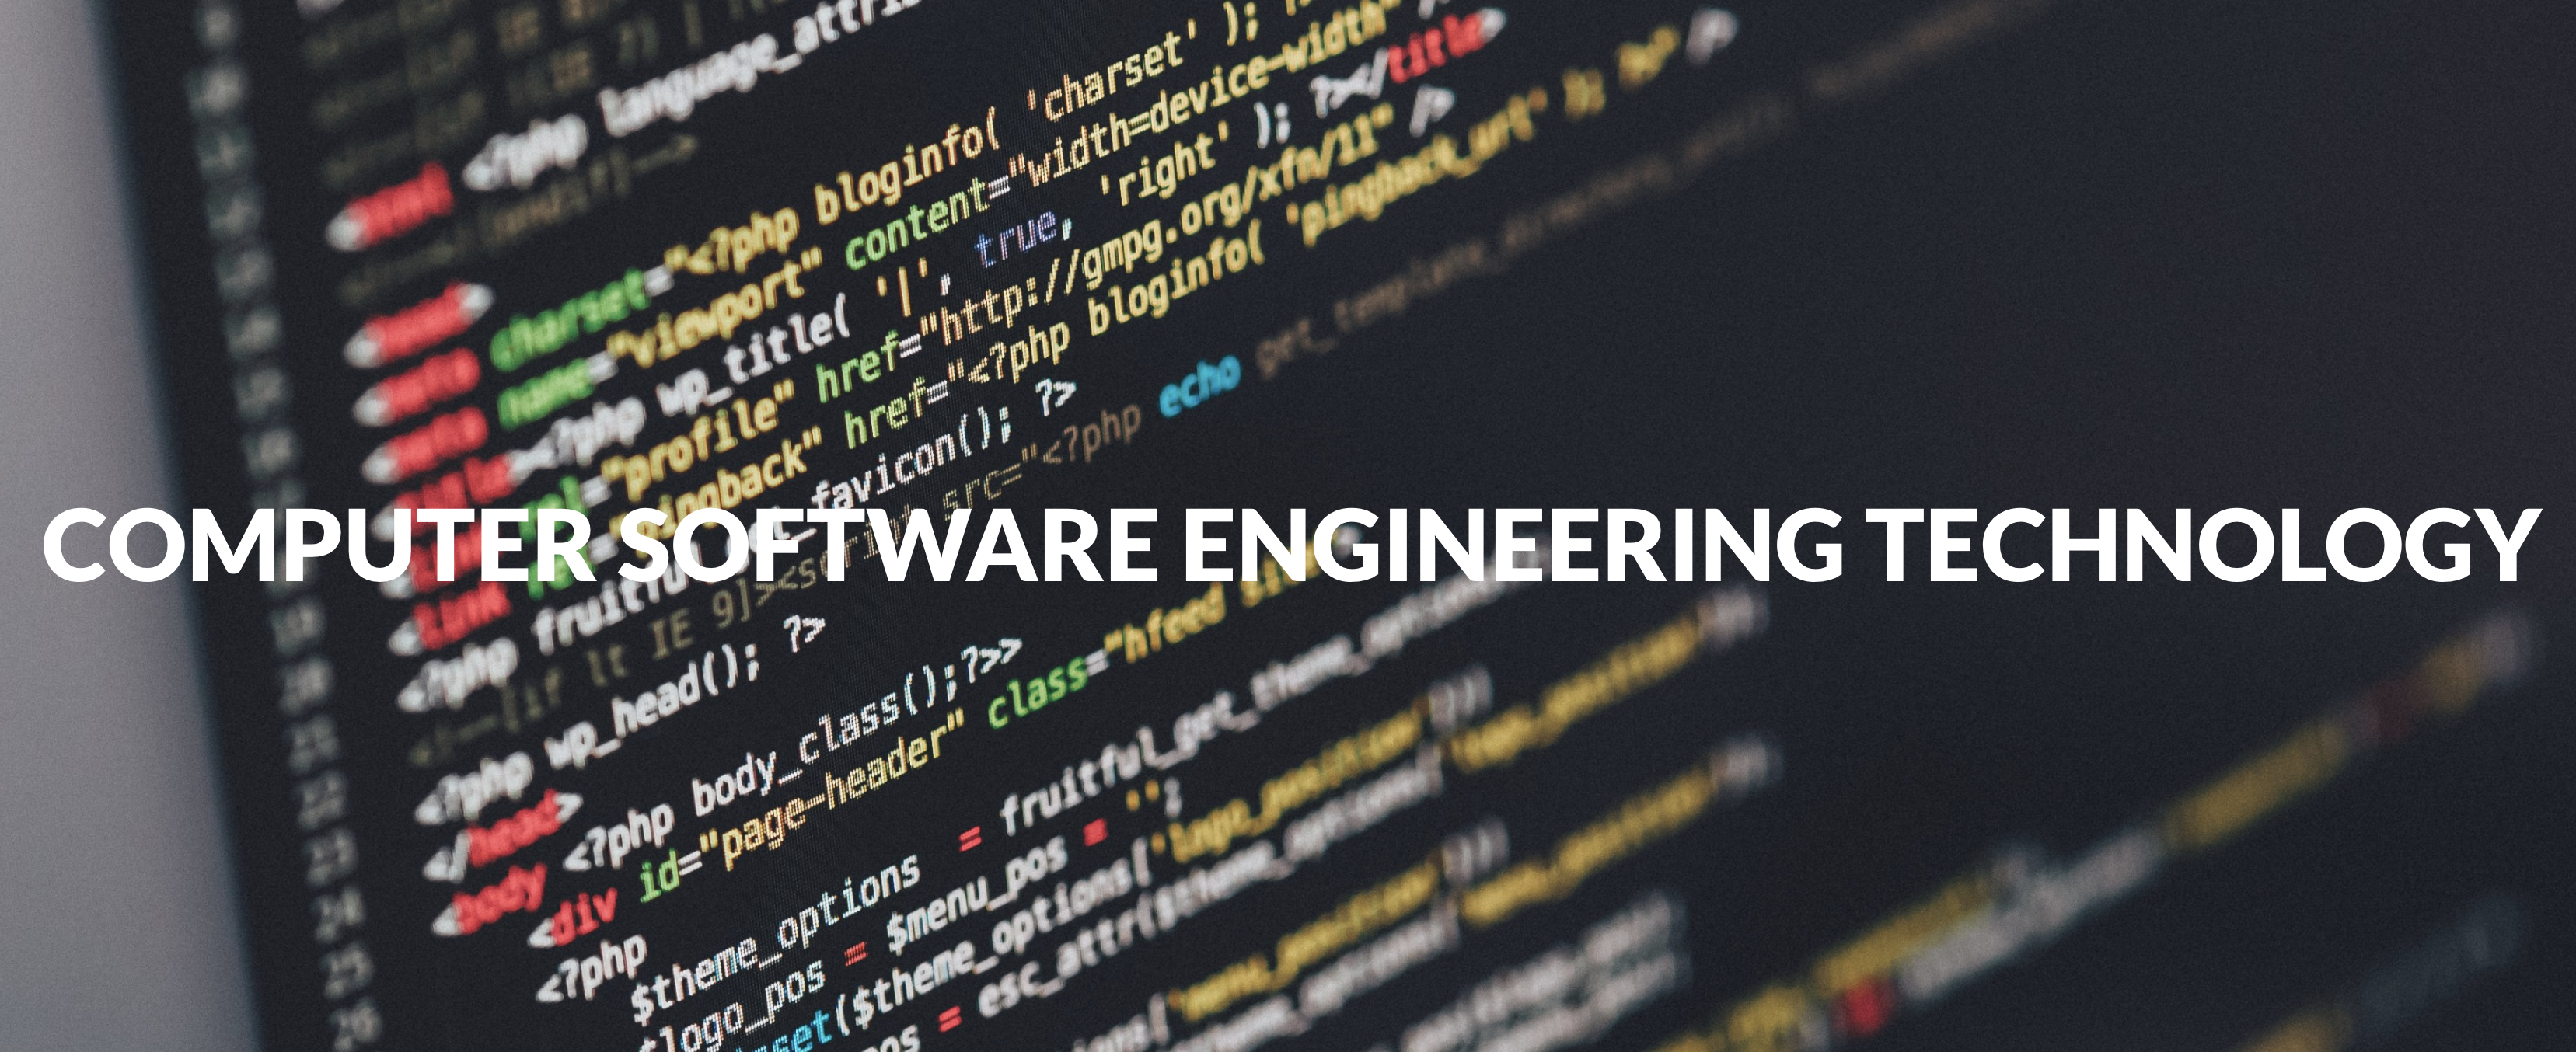 Software Engineering Technology